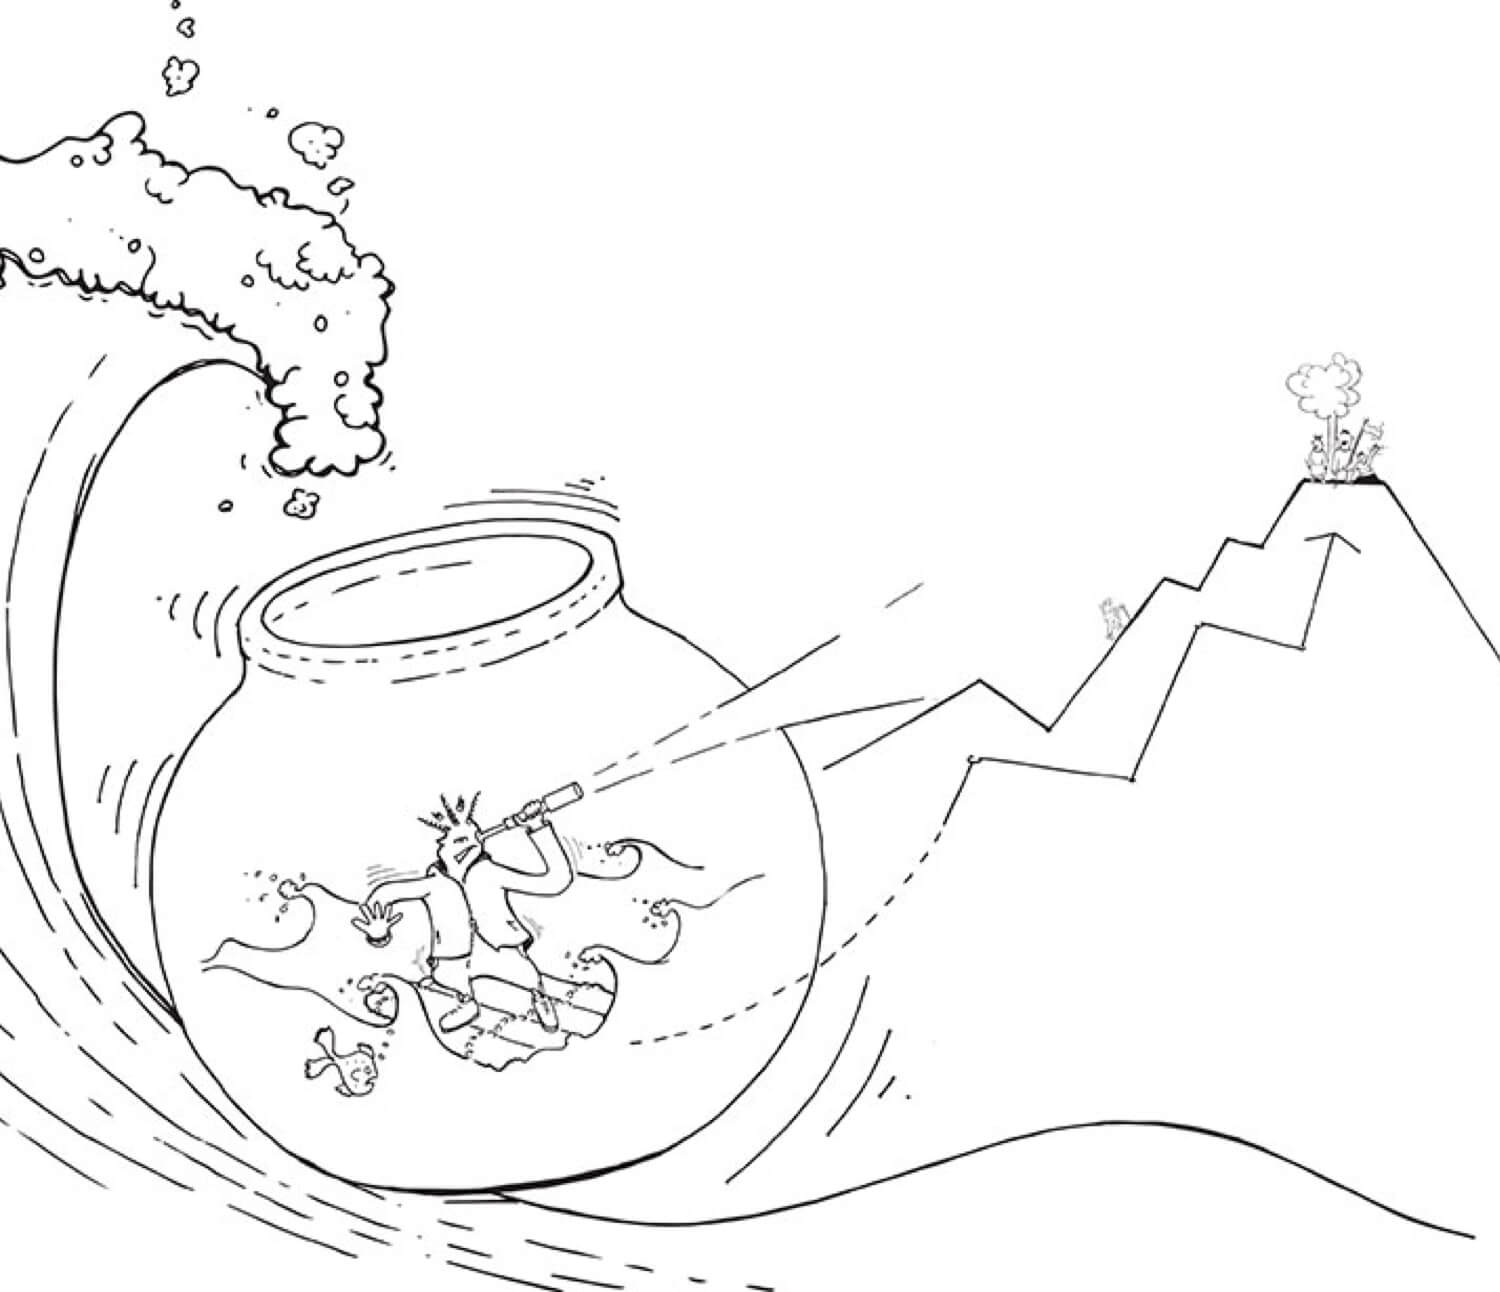 Simple graphic of a young catalyst riding waves in a goldfish bowl